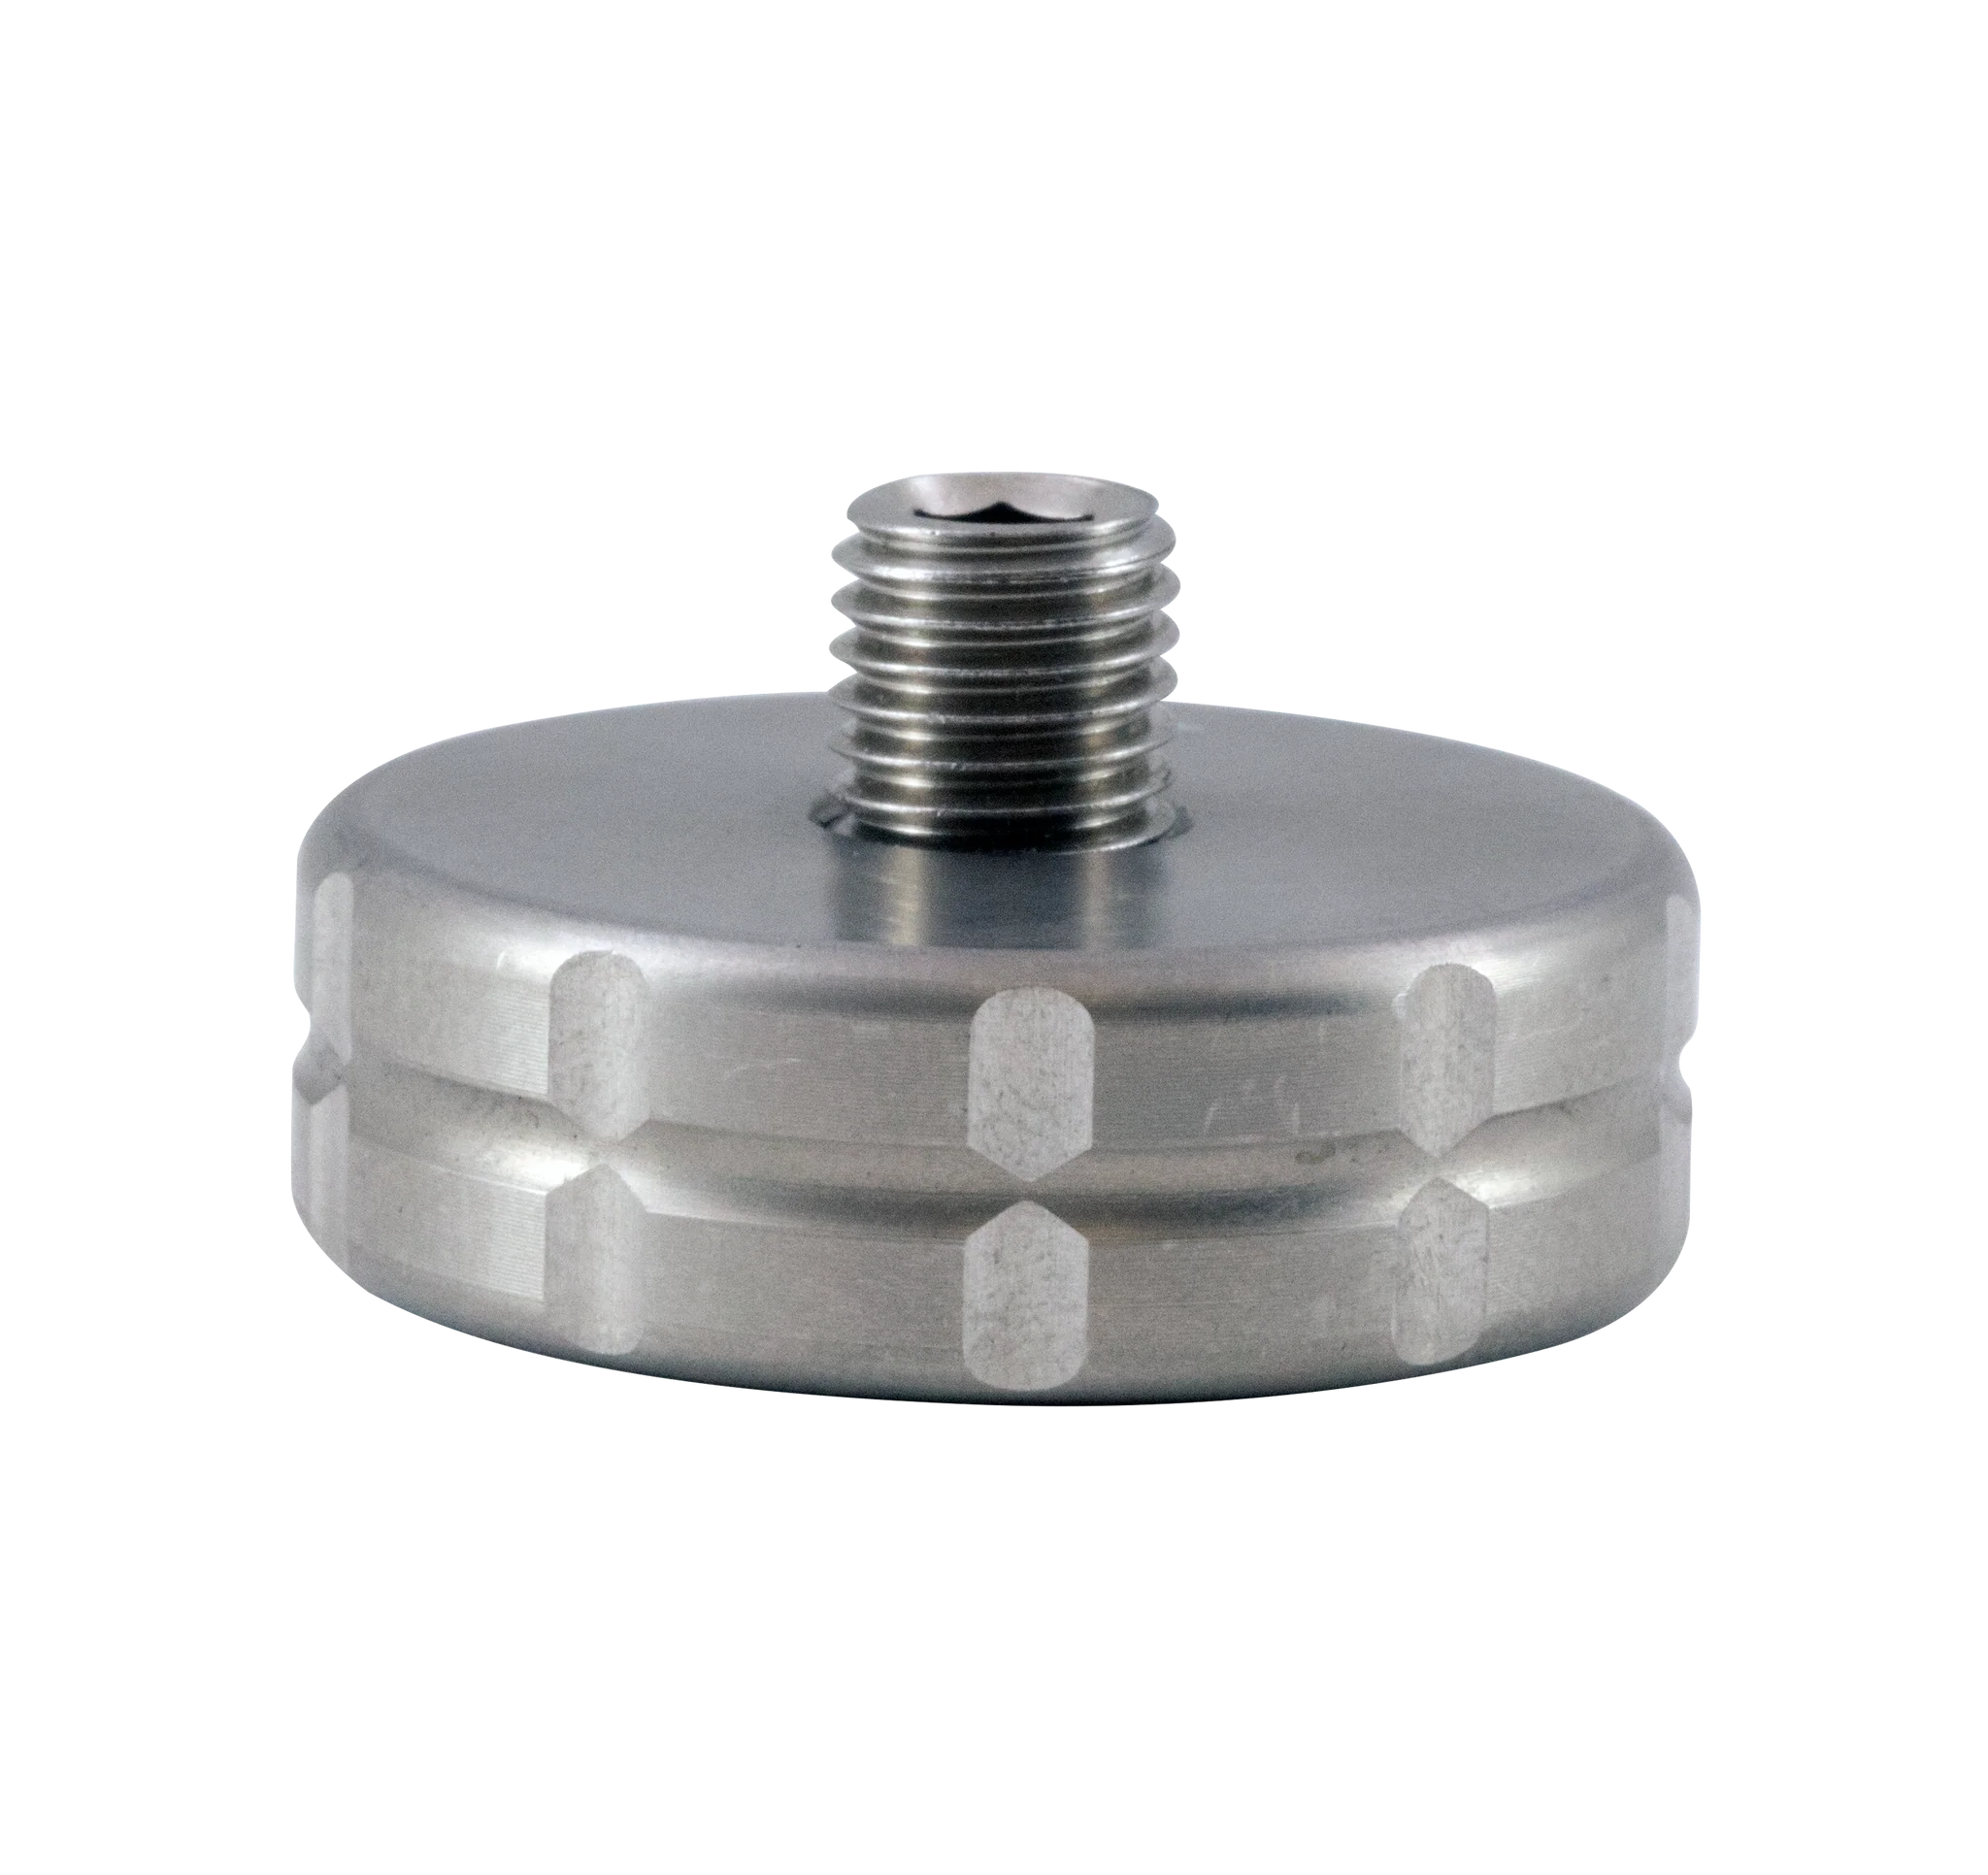 Axcel Stainless Steel Weight (1 oz)